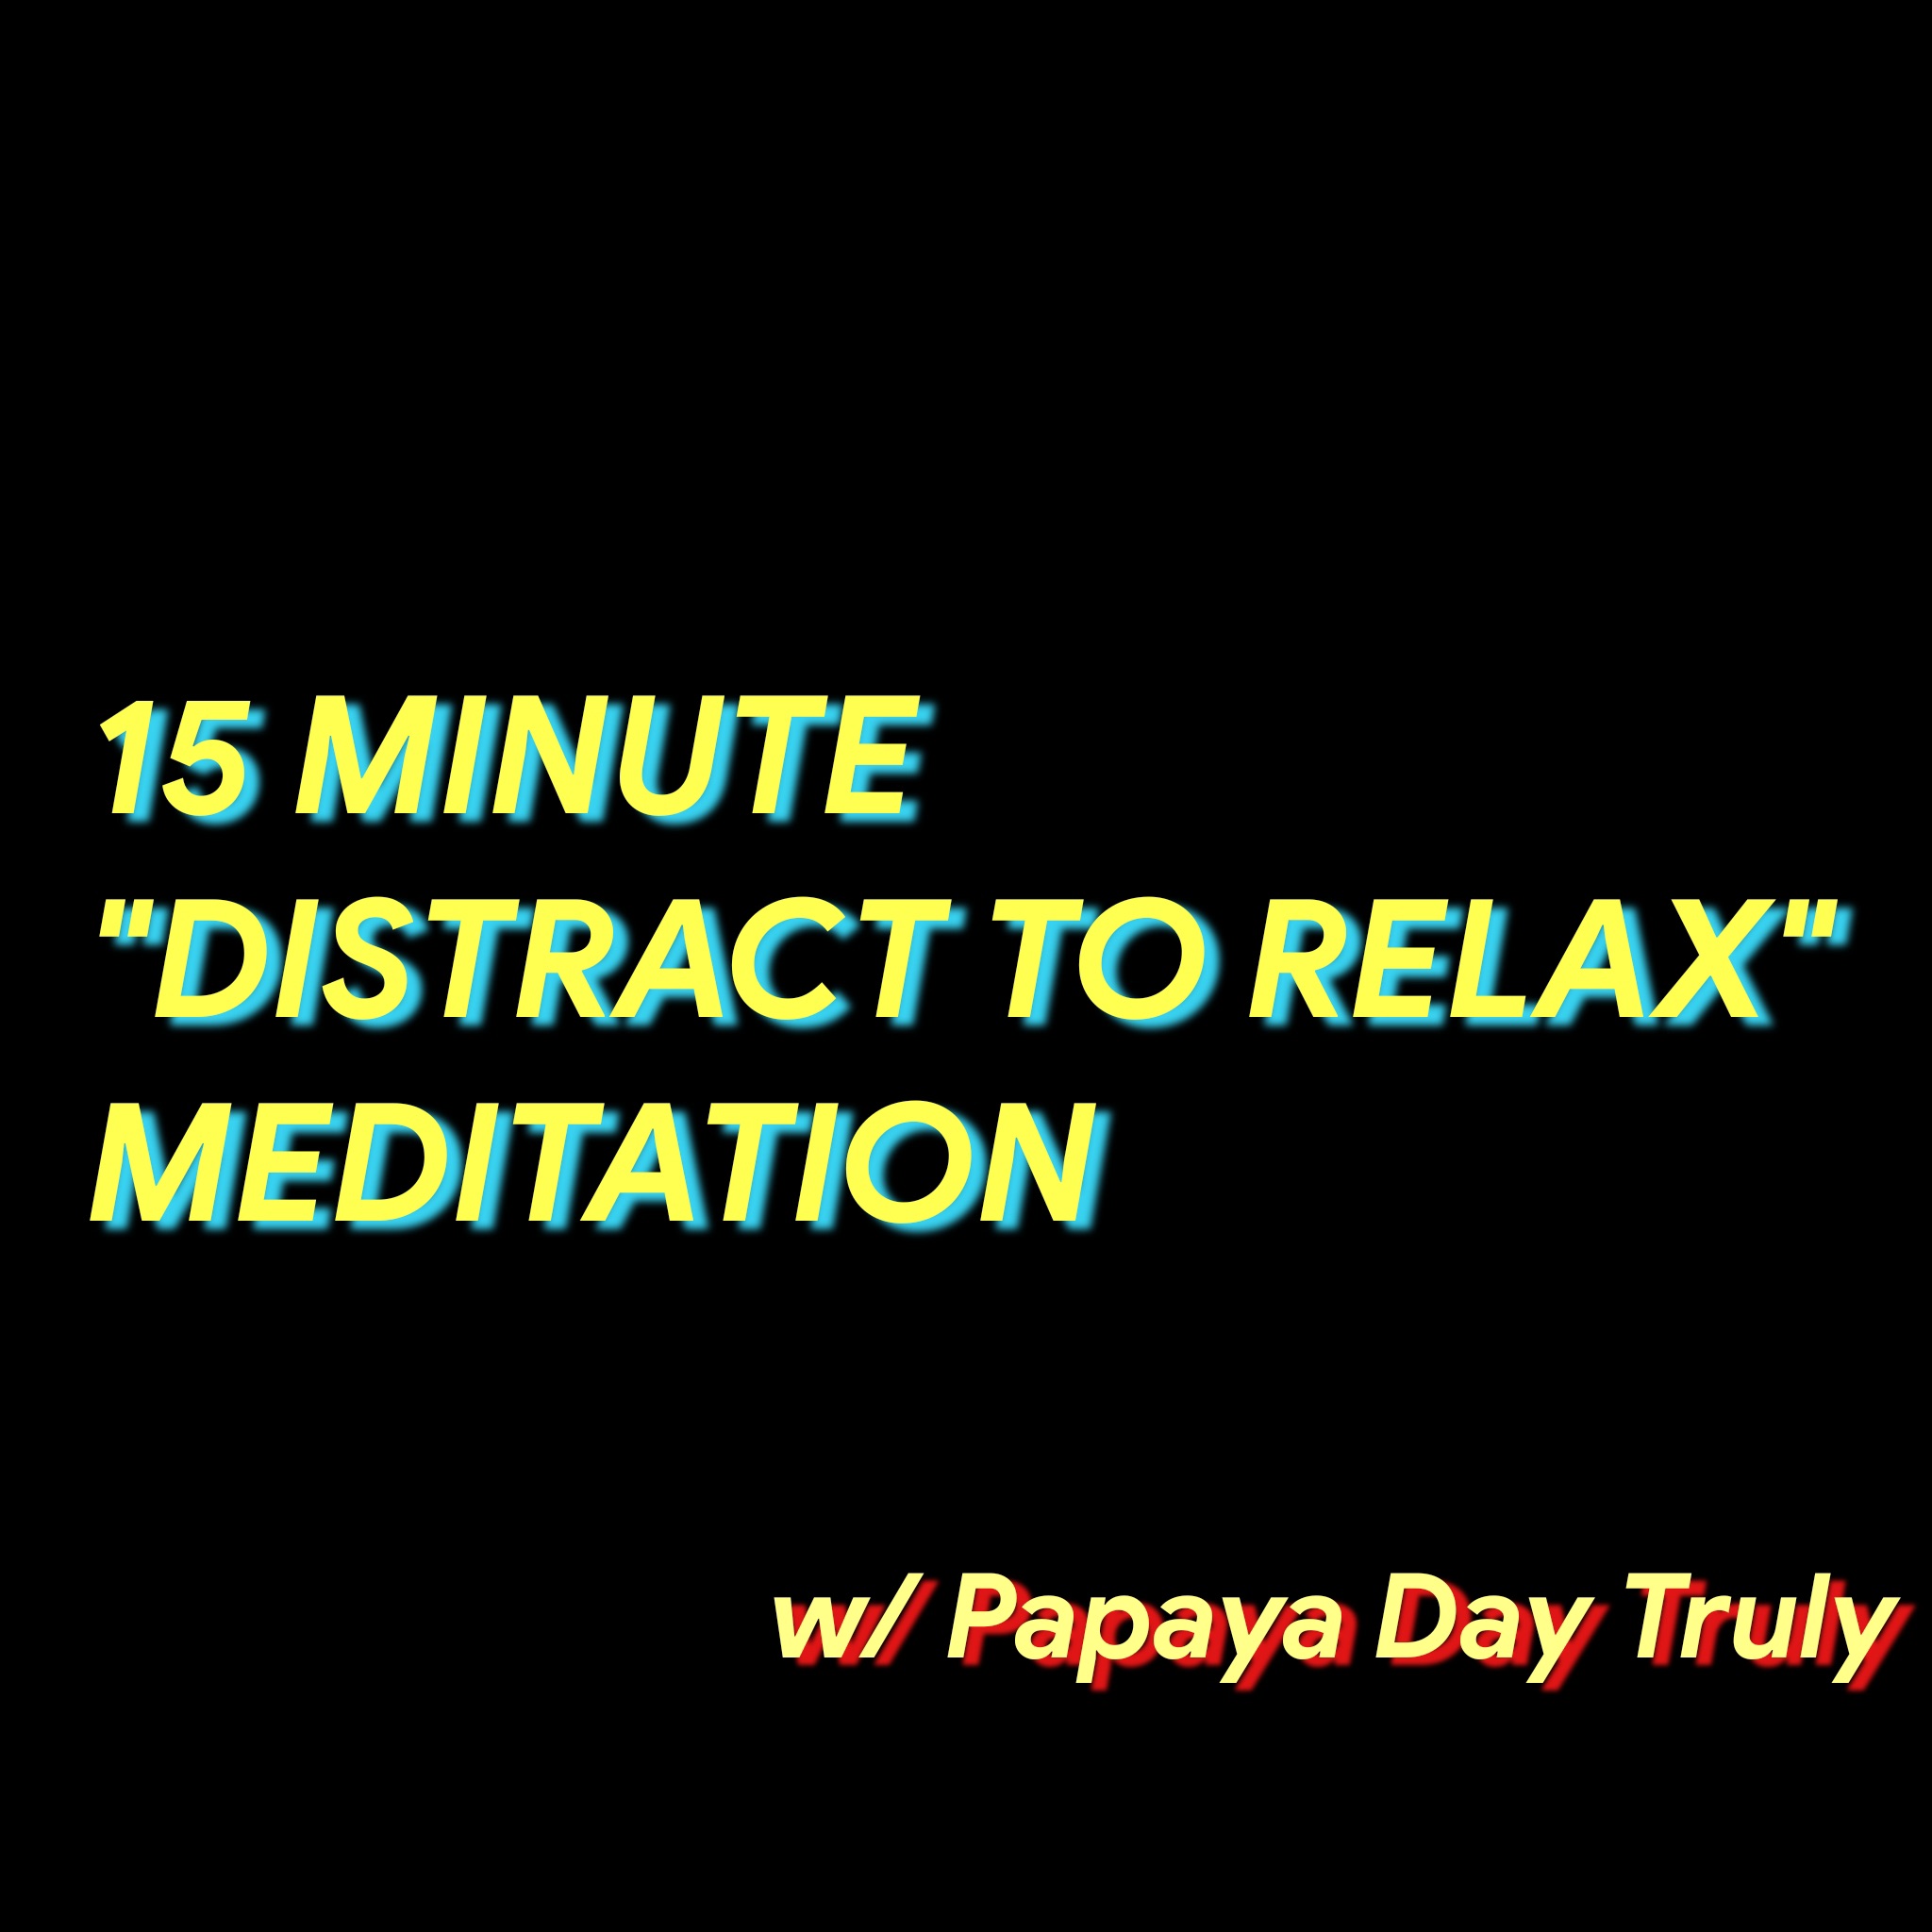 15 Minute Distract to Relax Meditation